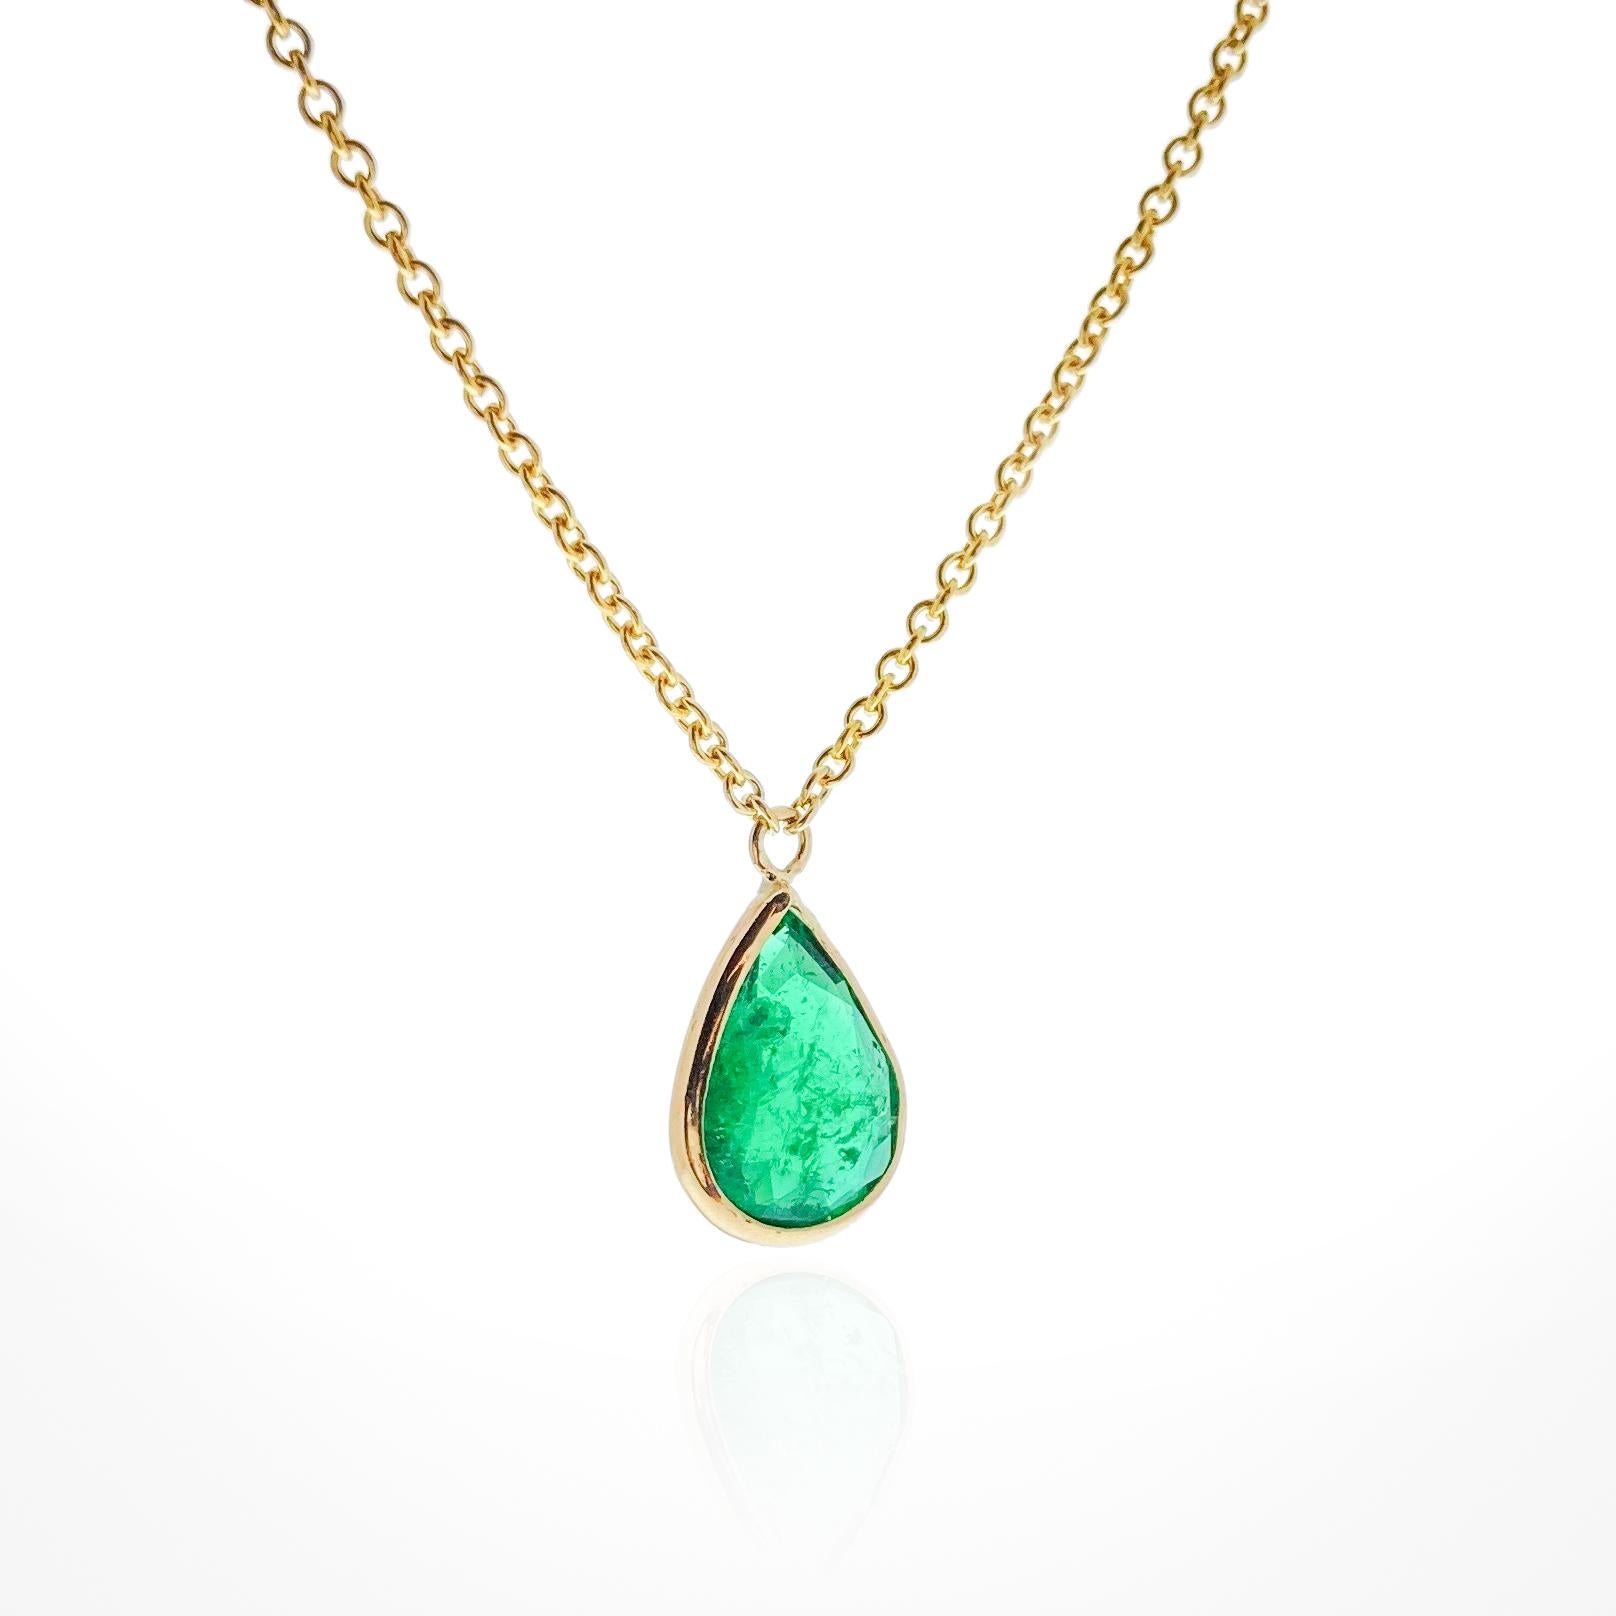 This necklace features a pear-cut green emerald with a weight of 1.22 carats, set in 14k yellow gold (YG). Emeralds are highly prized for their rich green color, and the pear cut, with its distinctive teardrop shape, adds an elegant and unique touch